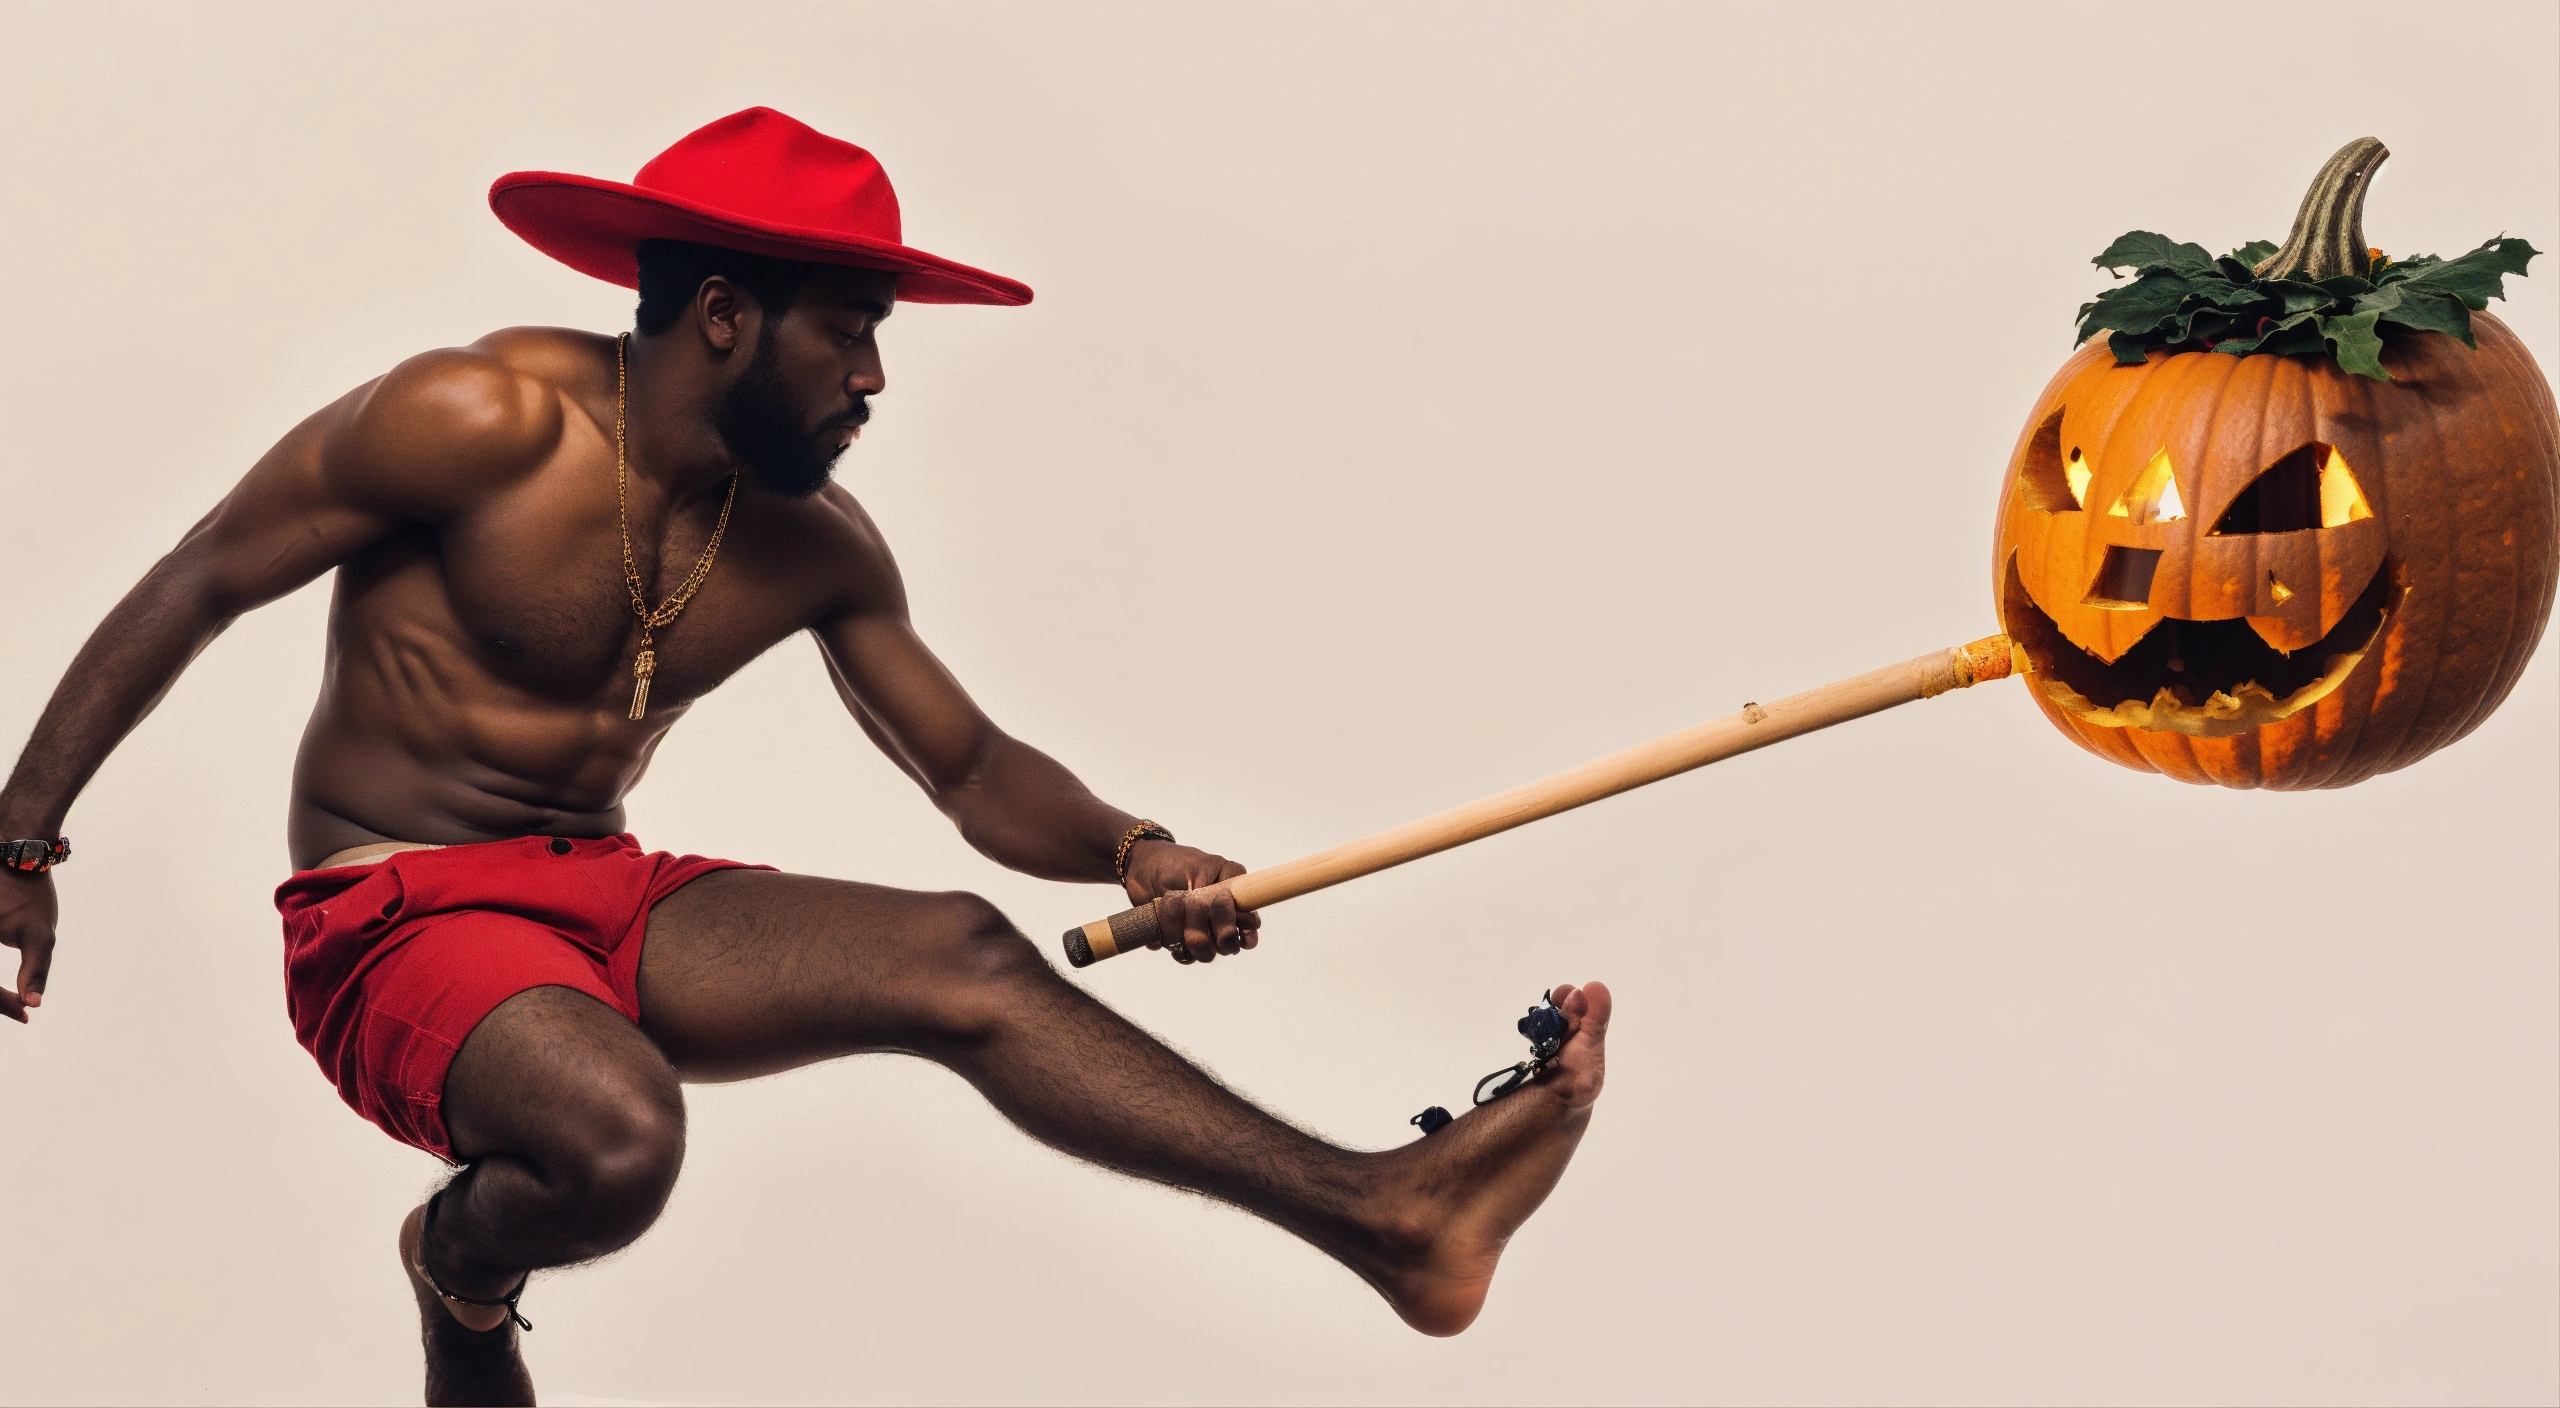 Lexica - A black man, wearing a red hat, without tshirt, with one leg ...